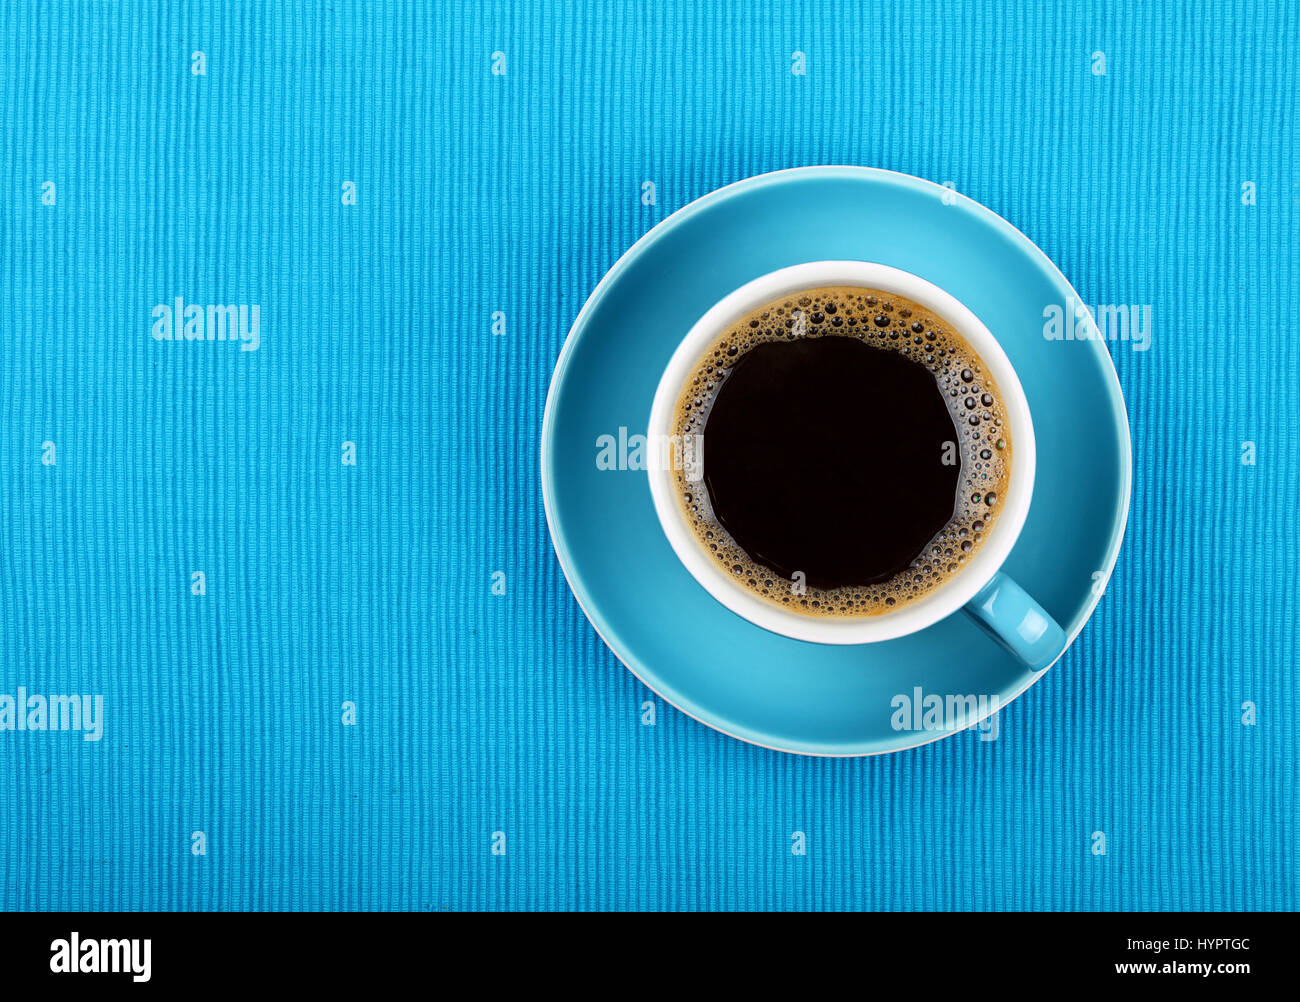 Full cup of black Americano or instant coffee on saucer over blue tablecloth, close up, elevated top view Stock Photo